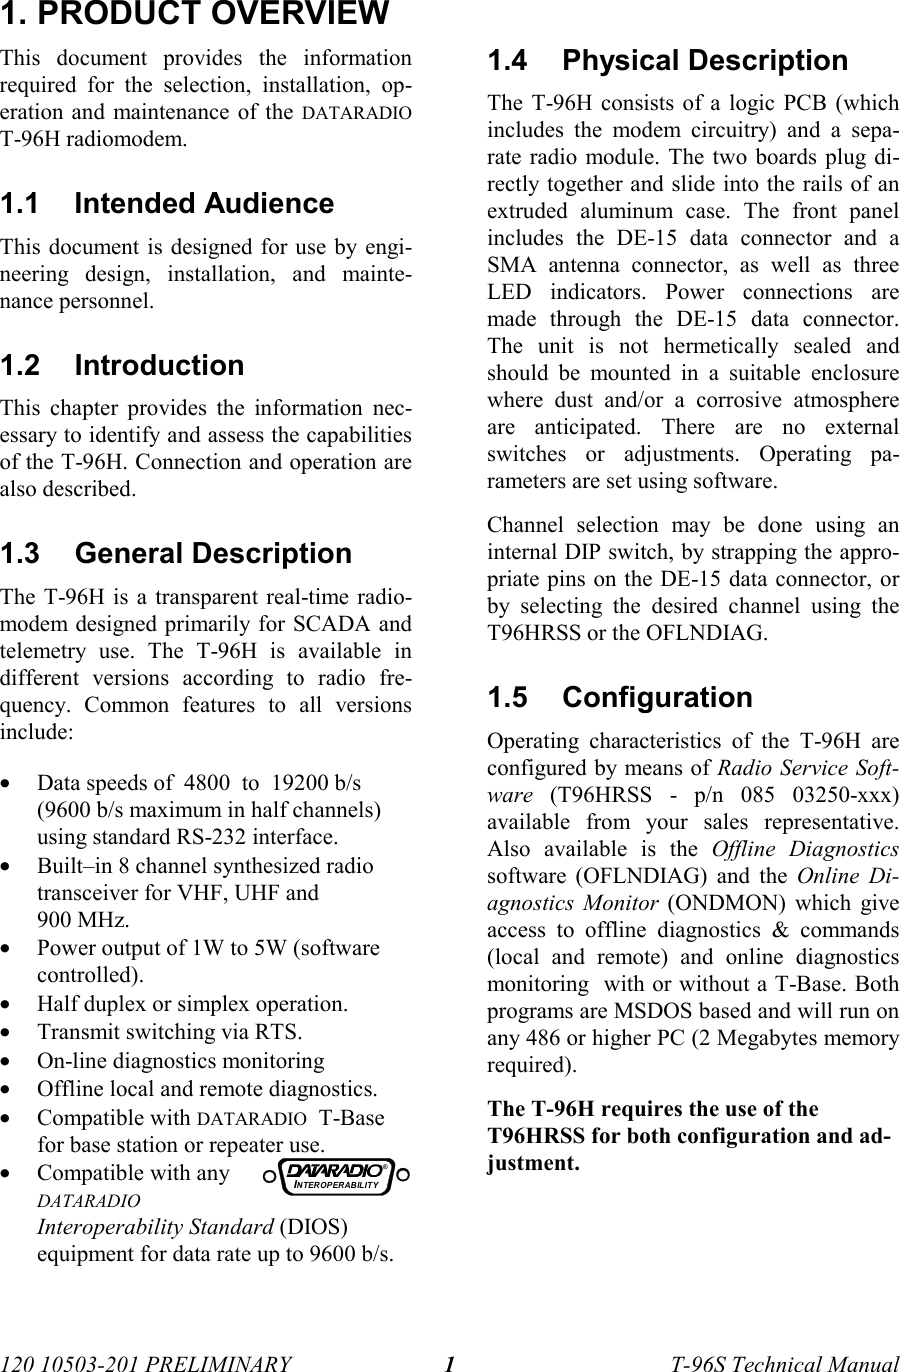 120 10503-201 PRELIMINARY T-96S Technical Manual11. PRODUCT OVERVIEWThis document provides the informationrequired for the selection, installation, op-eration and maintenance of the DATARADIOT-96H radiomodem.1.1 Intended AudienceThis document is designed for use by engi-neering design, installation, and mainte-nance personnel.1.2 IntroductionThis chapter provides the information nec-essary to identify and assess the capabilitiesof the T-96H. Connection and operation arealso described.1.3 General DescriptionThe T-96H is a transparent real-time radio-modem designed primarily for SCADA andtelemetry use. The T-96H is available indifferent versions according to radio fre-quency. Common features to all versionsinclude:• Data speeds of  4800  to  19200 b/s(9600 b/s maximum in half channels)using standard RS-232 interface.• Built–in 8 channel synthesized radiotransceiver for VHF, UHF and900 MHz.• Power output of 1W to 5W (softwarecontrolled).• Half duplex or simplex operation.• Transmit switching via RTS.• On-line diagnostics monitoring• Offline local and remote diagnostics.• Compatible with DATARADIO  T-Basefor base station or repeater use.• Compatible with anyDATARADIOInteroperability Standard (DIOS)equipment for data rate up to 9600 b/s.1.4 Physical DescriptionThe T-96H consists of a logic PCB (whichincludes the modem circuitry) and a sepa-rate radio module. The two boards plug di-rectly together and slide into the rails of anextruded aluminum case. The front panelincludes the DE-15 data connector and aSMA antenna connector, as well as threeLED indicators. Power connections aremade through the DE-15 data connector.The unit is not hermetically sealed andshould be mounted in a suitable enclosurewhere dust and/or a corrosive atmosphereare anticipated. There are no externalswitches or adjustments. Operating pa-rameters are set using software.Channel selection may be done using aninternal DIP switch, by strapping the appro-priate pins on the DE-15 data connector, orby selecting the desired channel using theT96HRSS or the OFLNDIAG.1.5 ConfigurationOperating characteristics of the T-96H areconfigured by means of Radio Service Soft-ware (T96HRSS - p/n 085 03250-xxx)available from your sales representative.Also available is the Offline Diagnosticssoftware (OFLNDIAG) and the Online Di-agnostics Monitor (ONDMON) which giveaccess to offline diagnostics &amp; commands(local and remote) and online diagnosticsmonitoring  with or without a T-Base. Bothprograms are MSDOS based and will run onany 486 or higher PC (2 Megabytes memoryrequired).The T-96H requires the use of theT96HRSS for both configuration and ad-justment.INTEROP ER ABILIT Y®